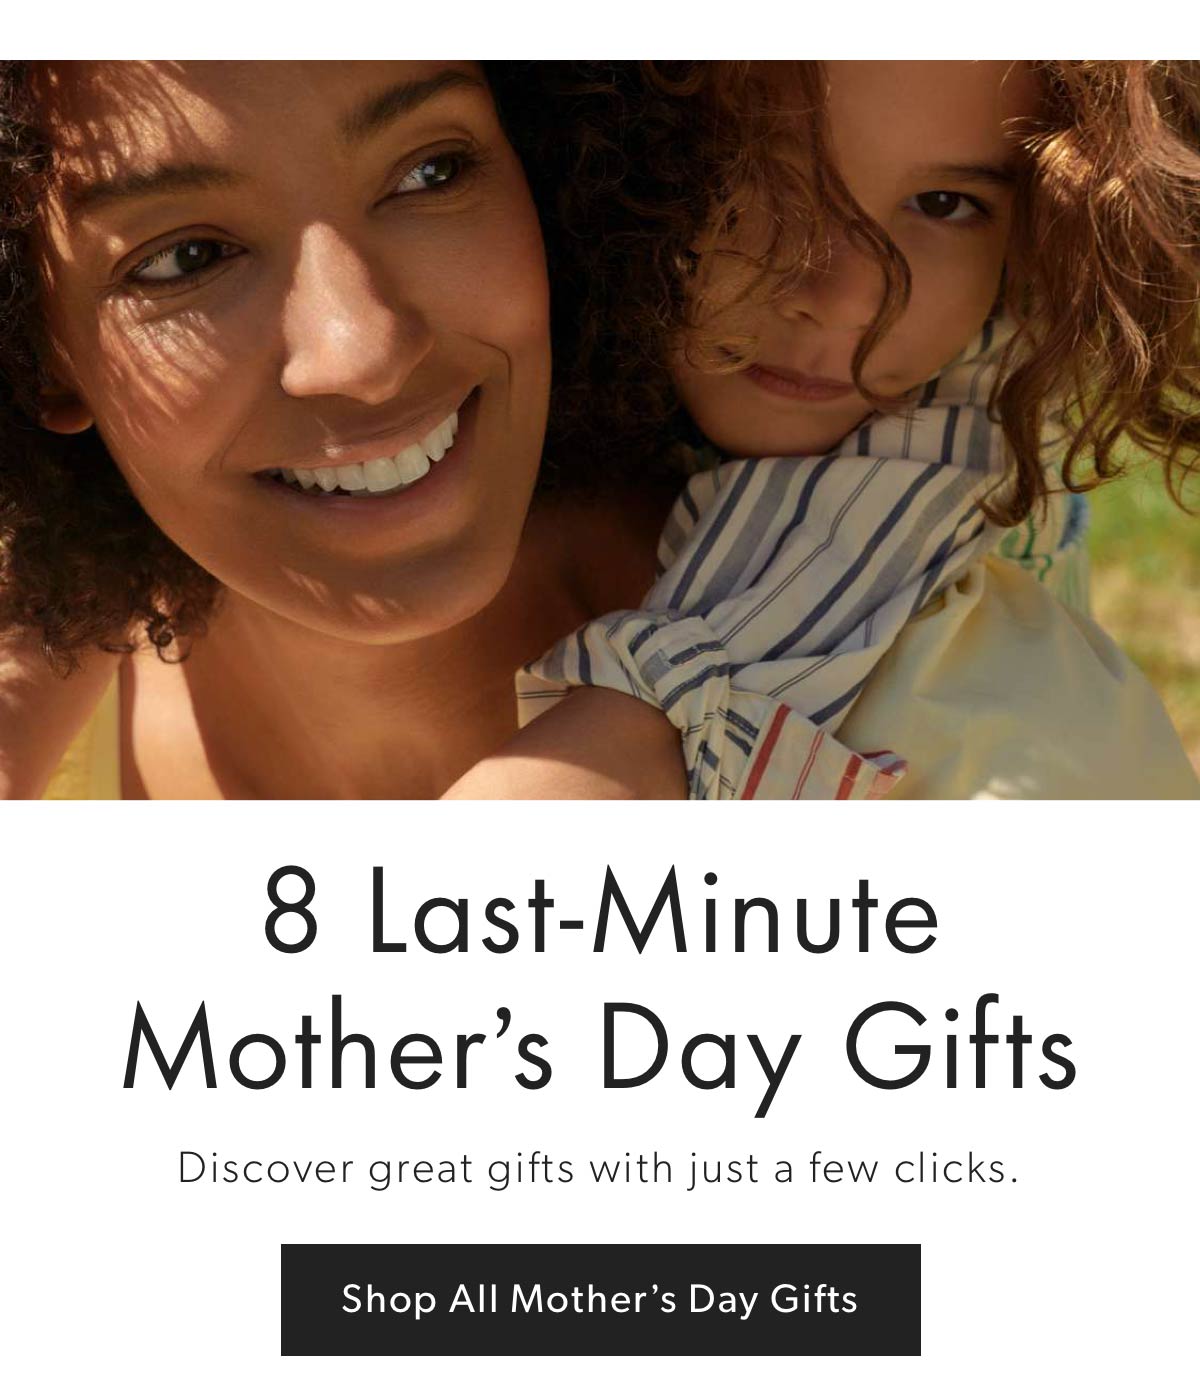 8 Last-Minute Mother's Day Gifts